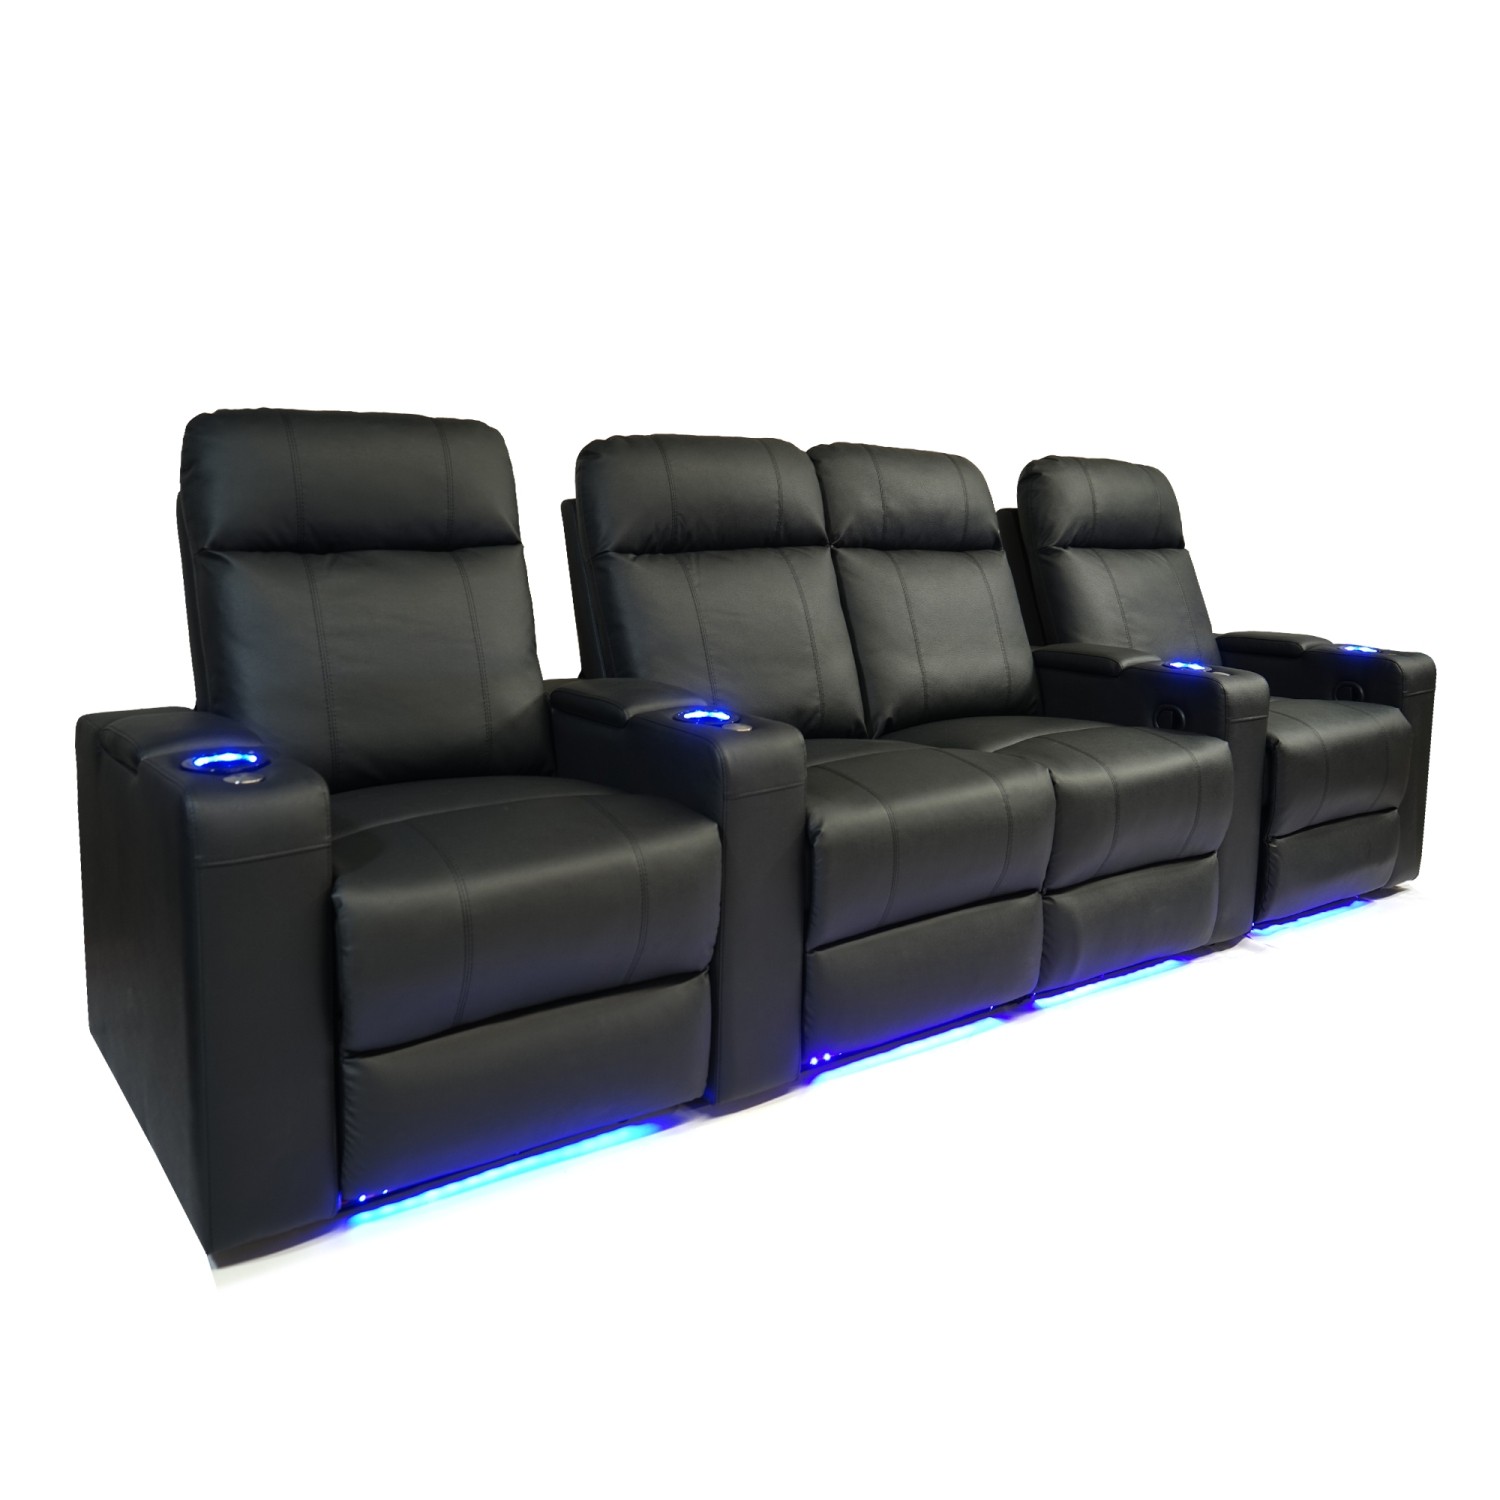 Valencia Piacenza Motorized Home Theater Seating - Top Grain Leather